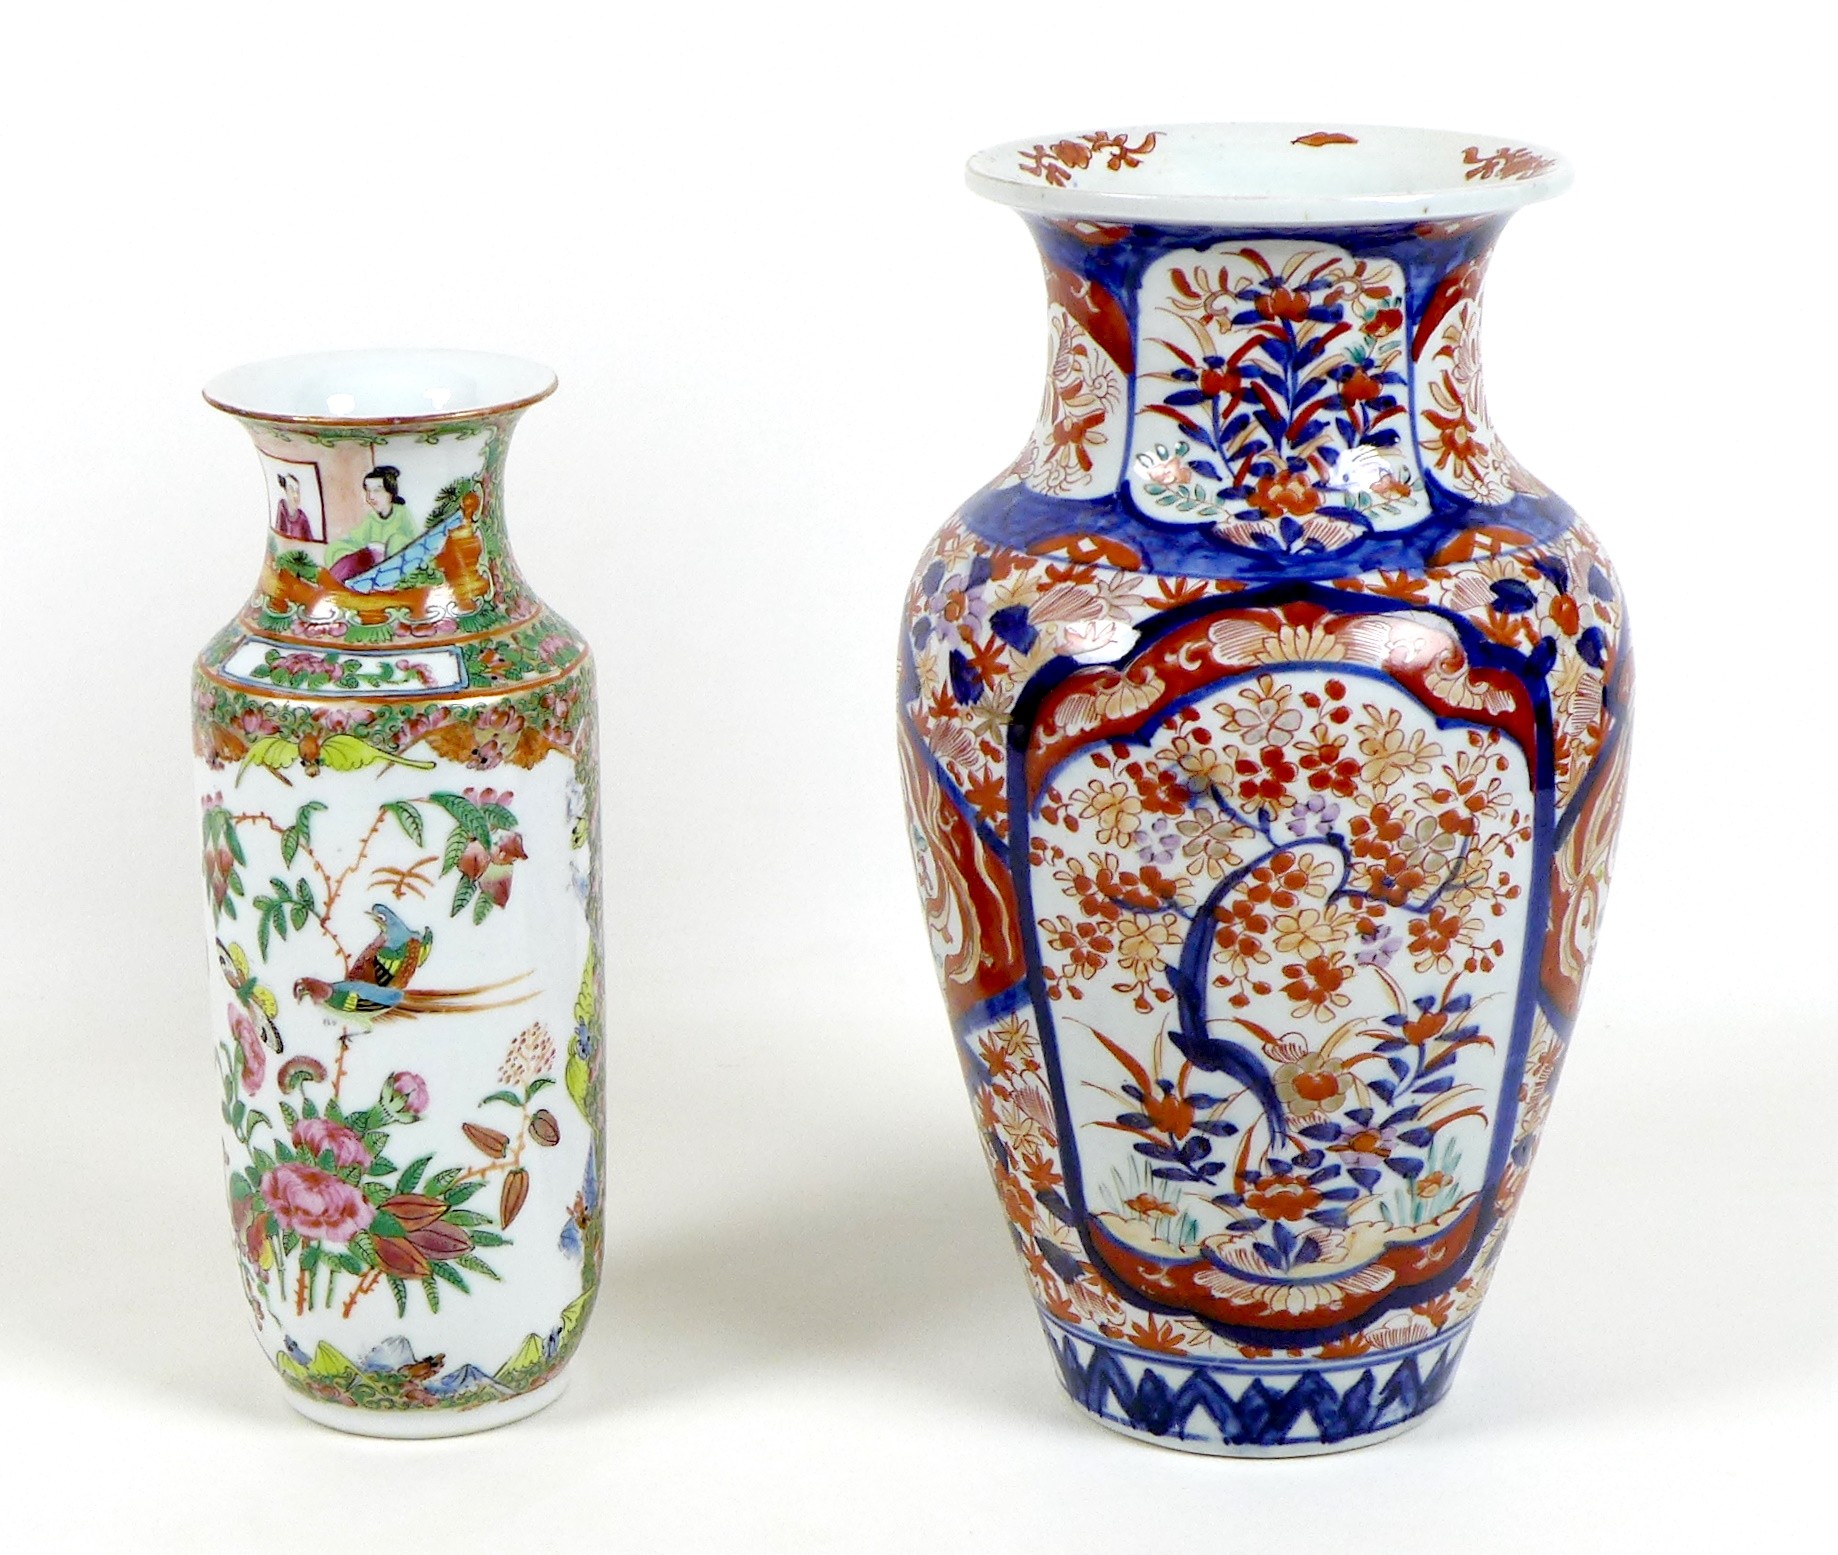 A Canton porcelain vase, Qing Dynasty, late 19th century, typically decorated with reserves of - Image 2 of 14